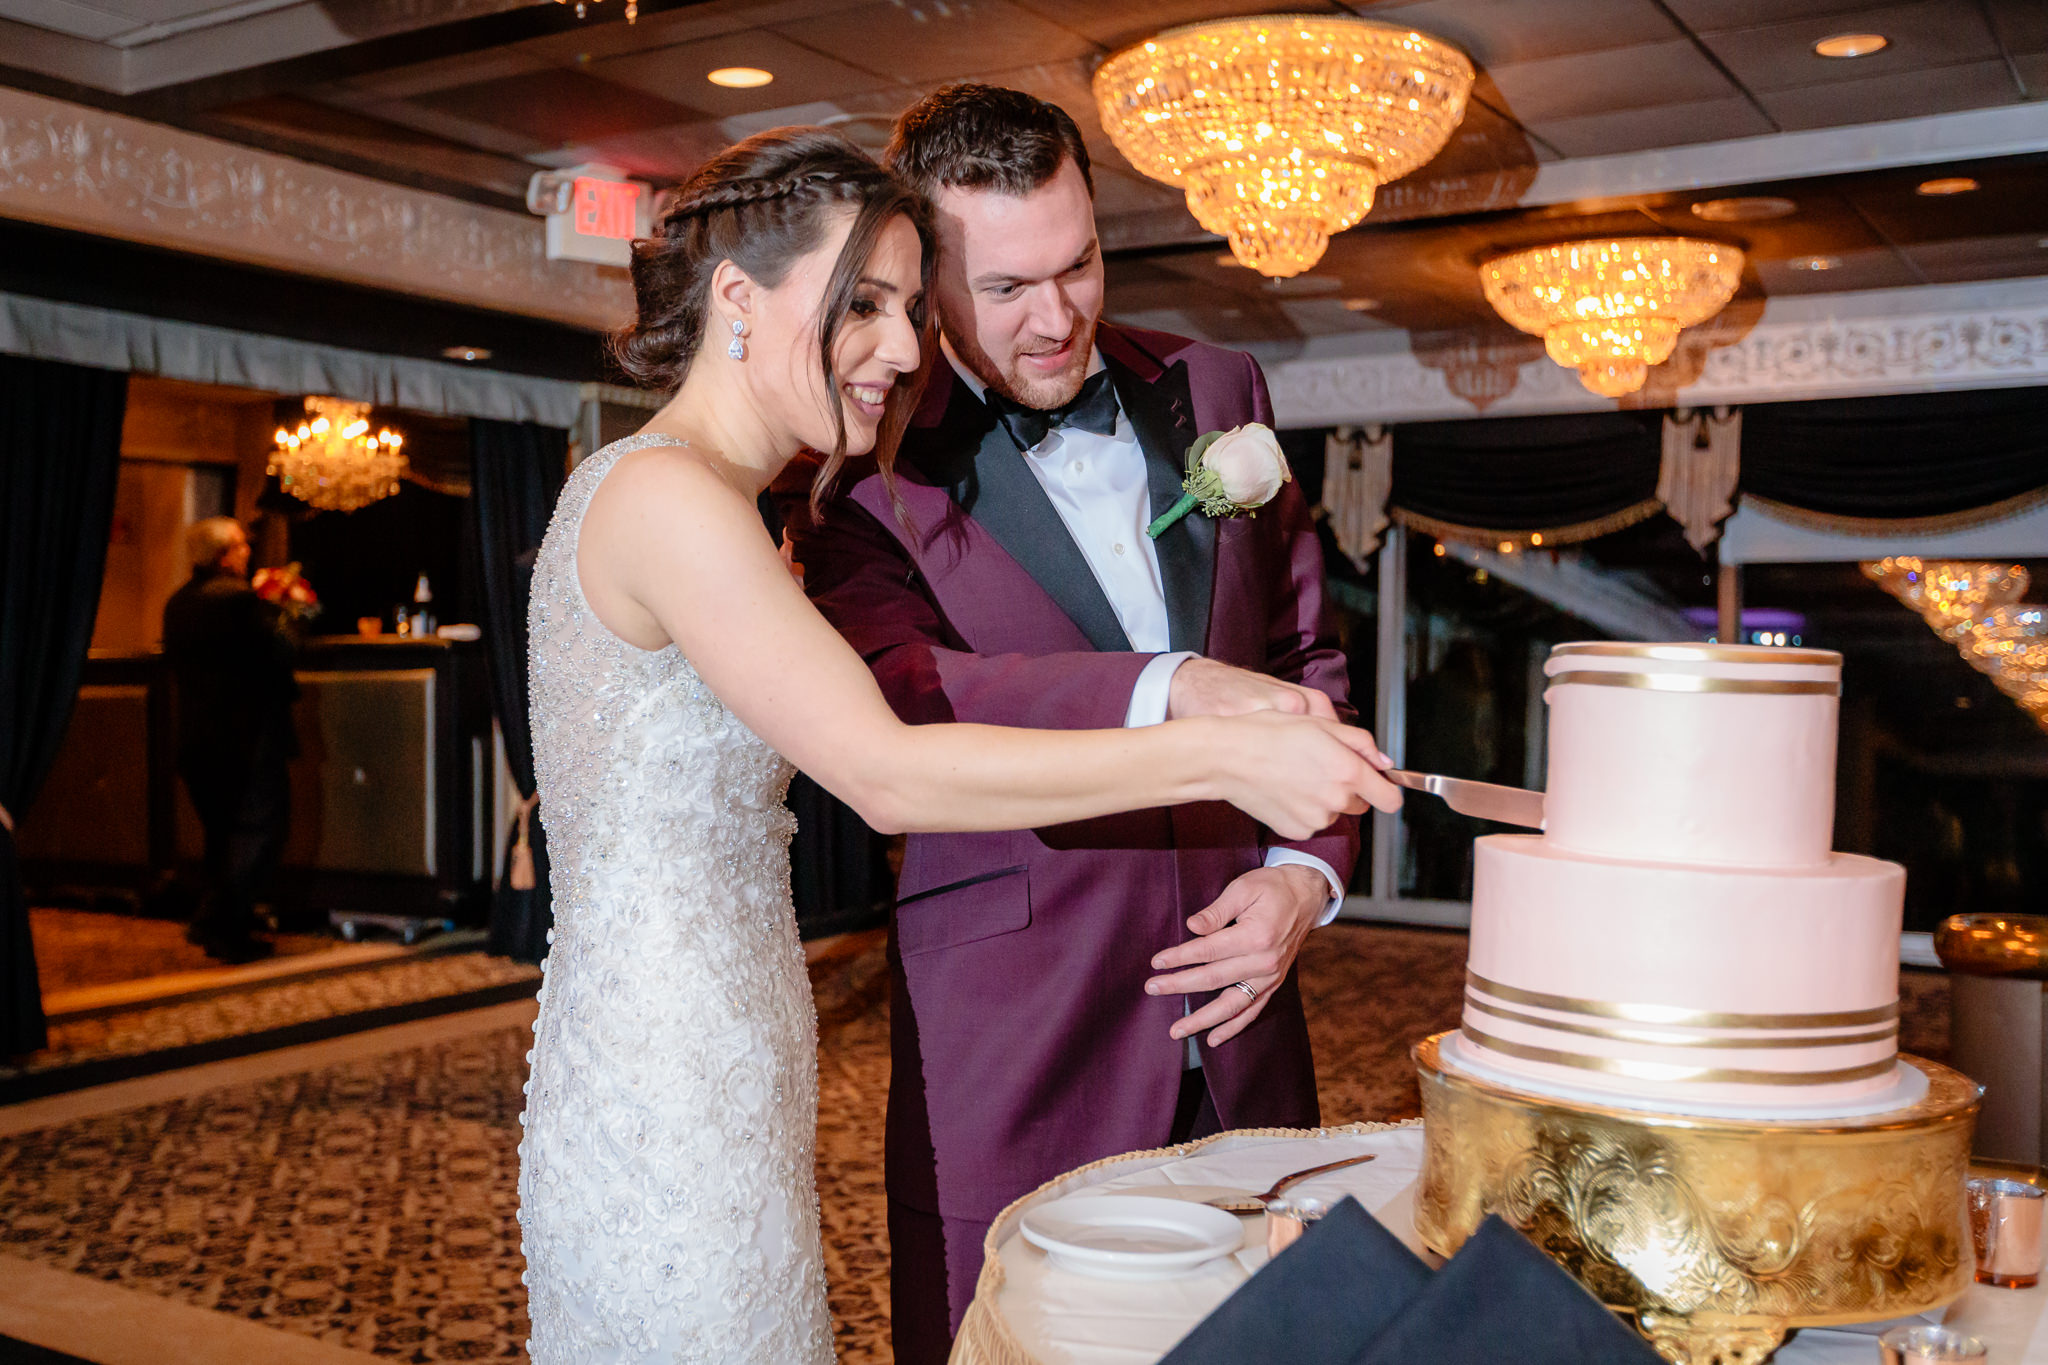 Bride & groom cut the cake by Oakmont bakery at the LeMont